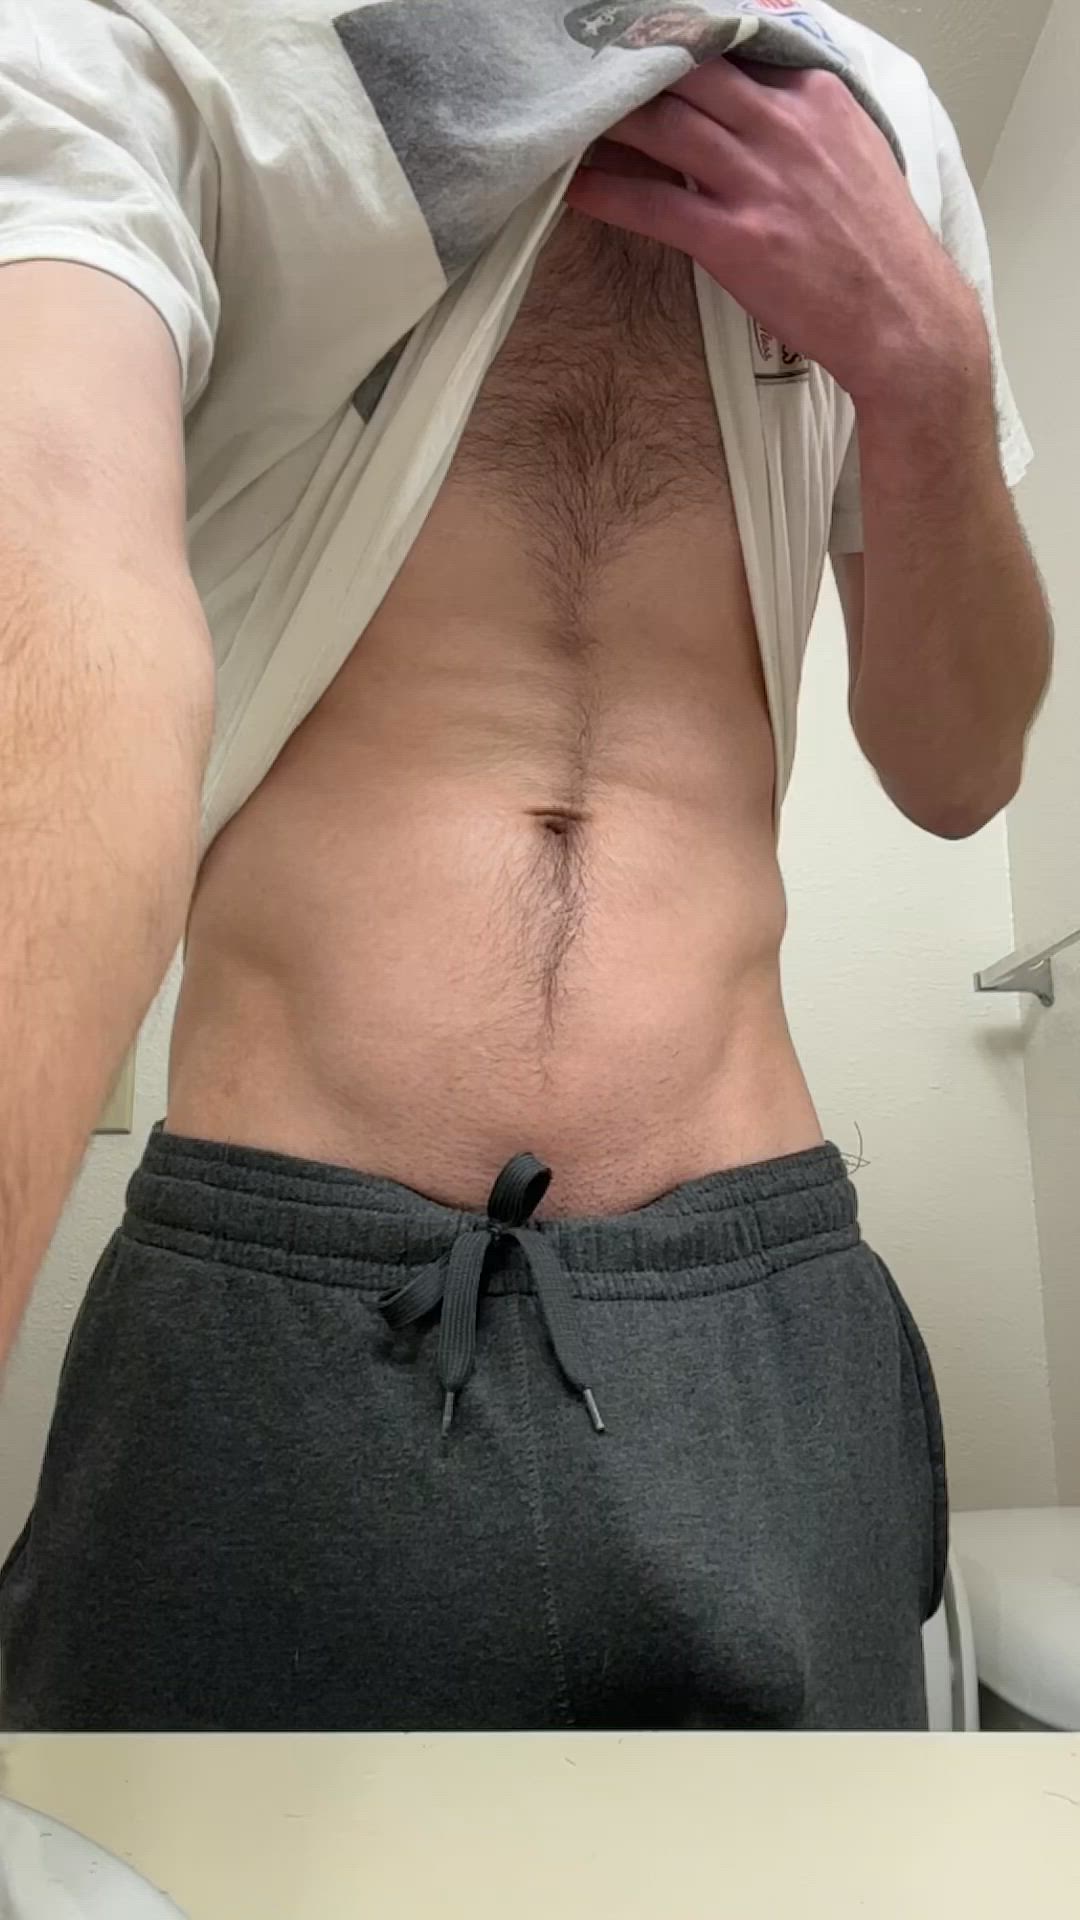 Big Dick porn video with onlyfans model hmubwd <strong>@yourfavdilf10</strong>